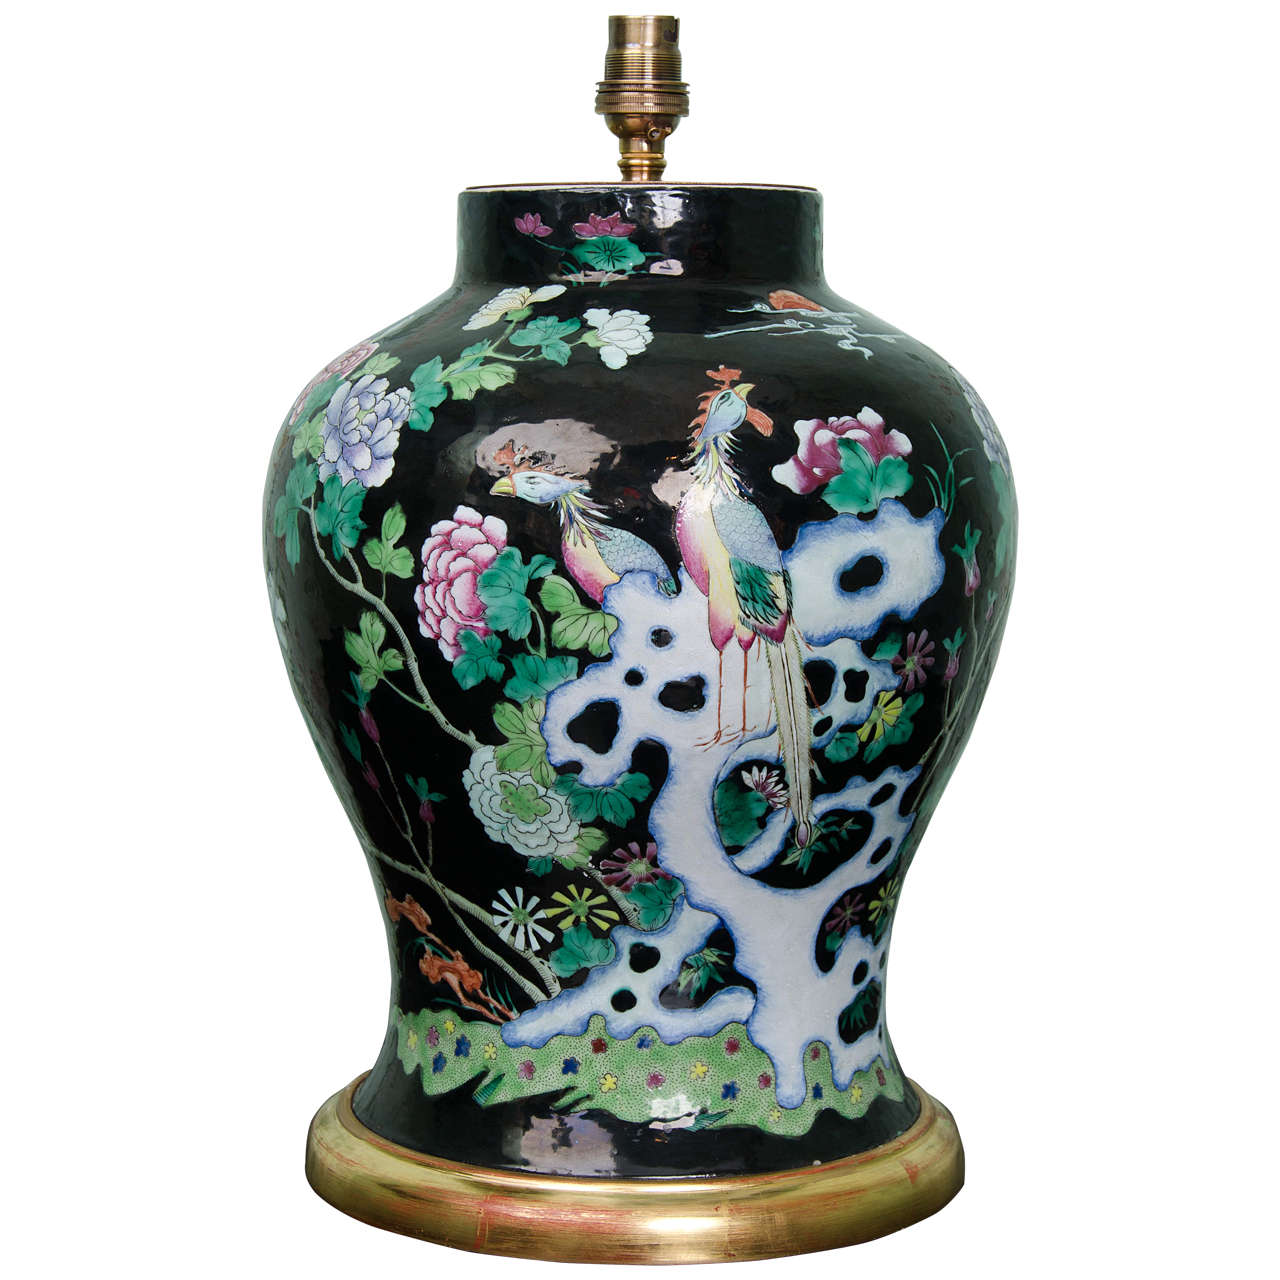 Chinese Famille Noire Porcelain Lamped Baluster Vase, circa 1850